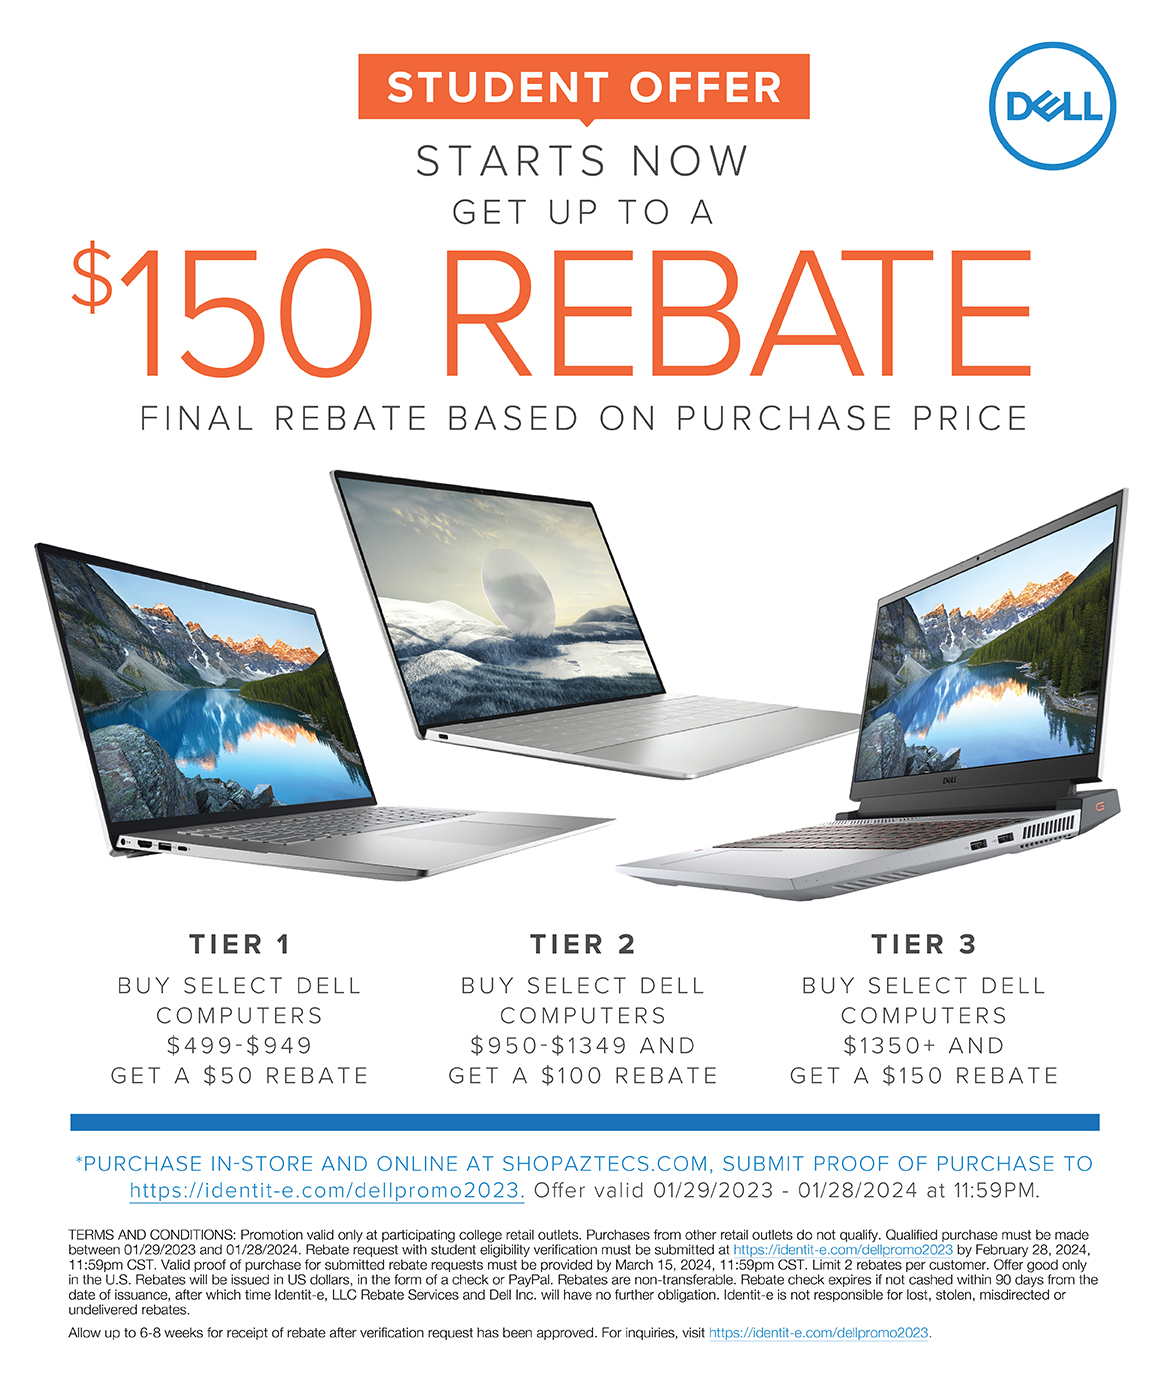 Student offer starts now. Get up to $150 rebate. FInal rebate based on purchase price.